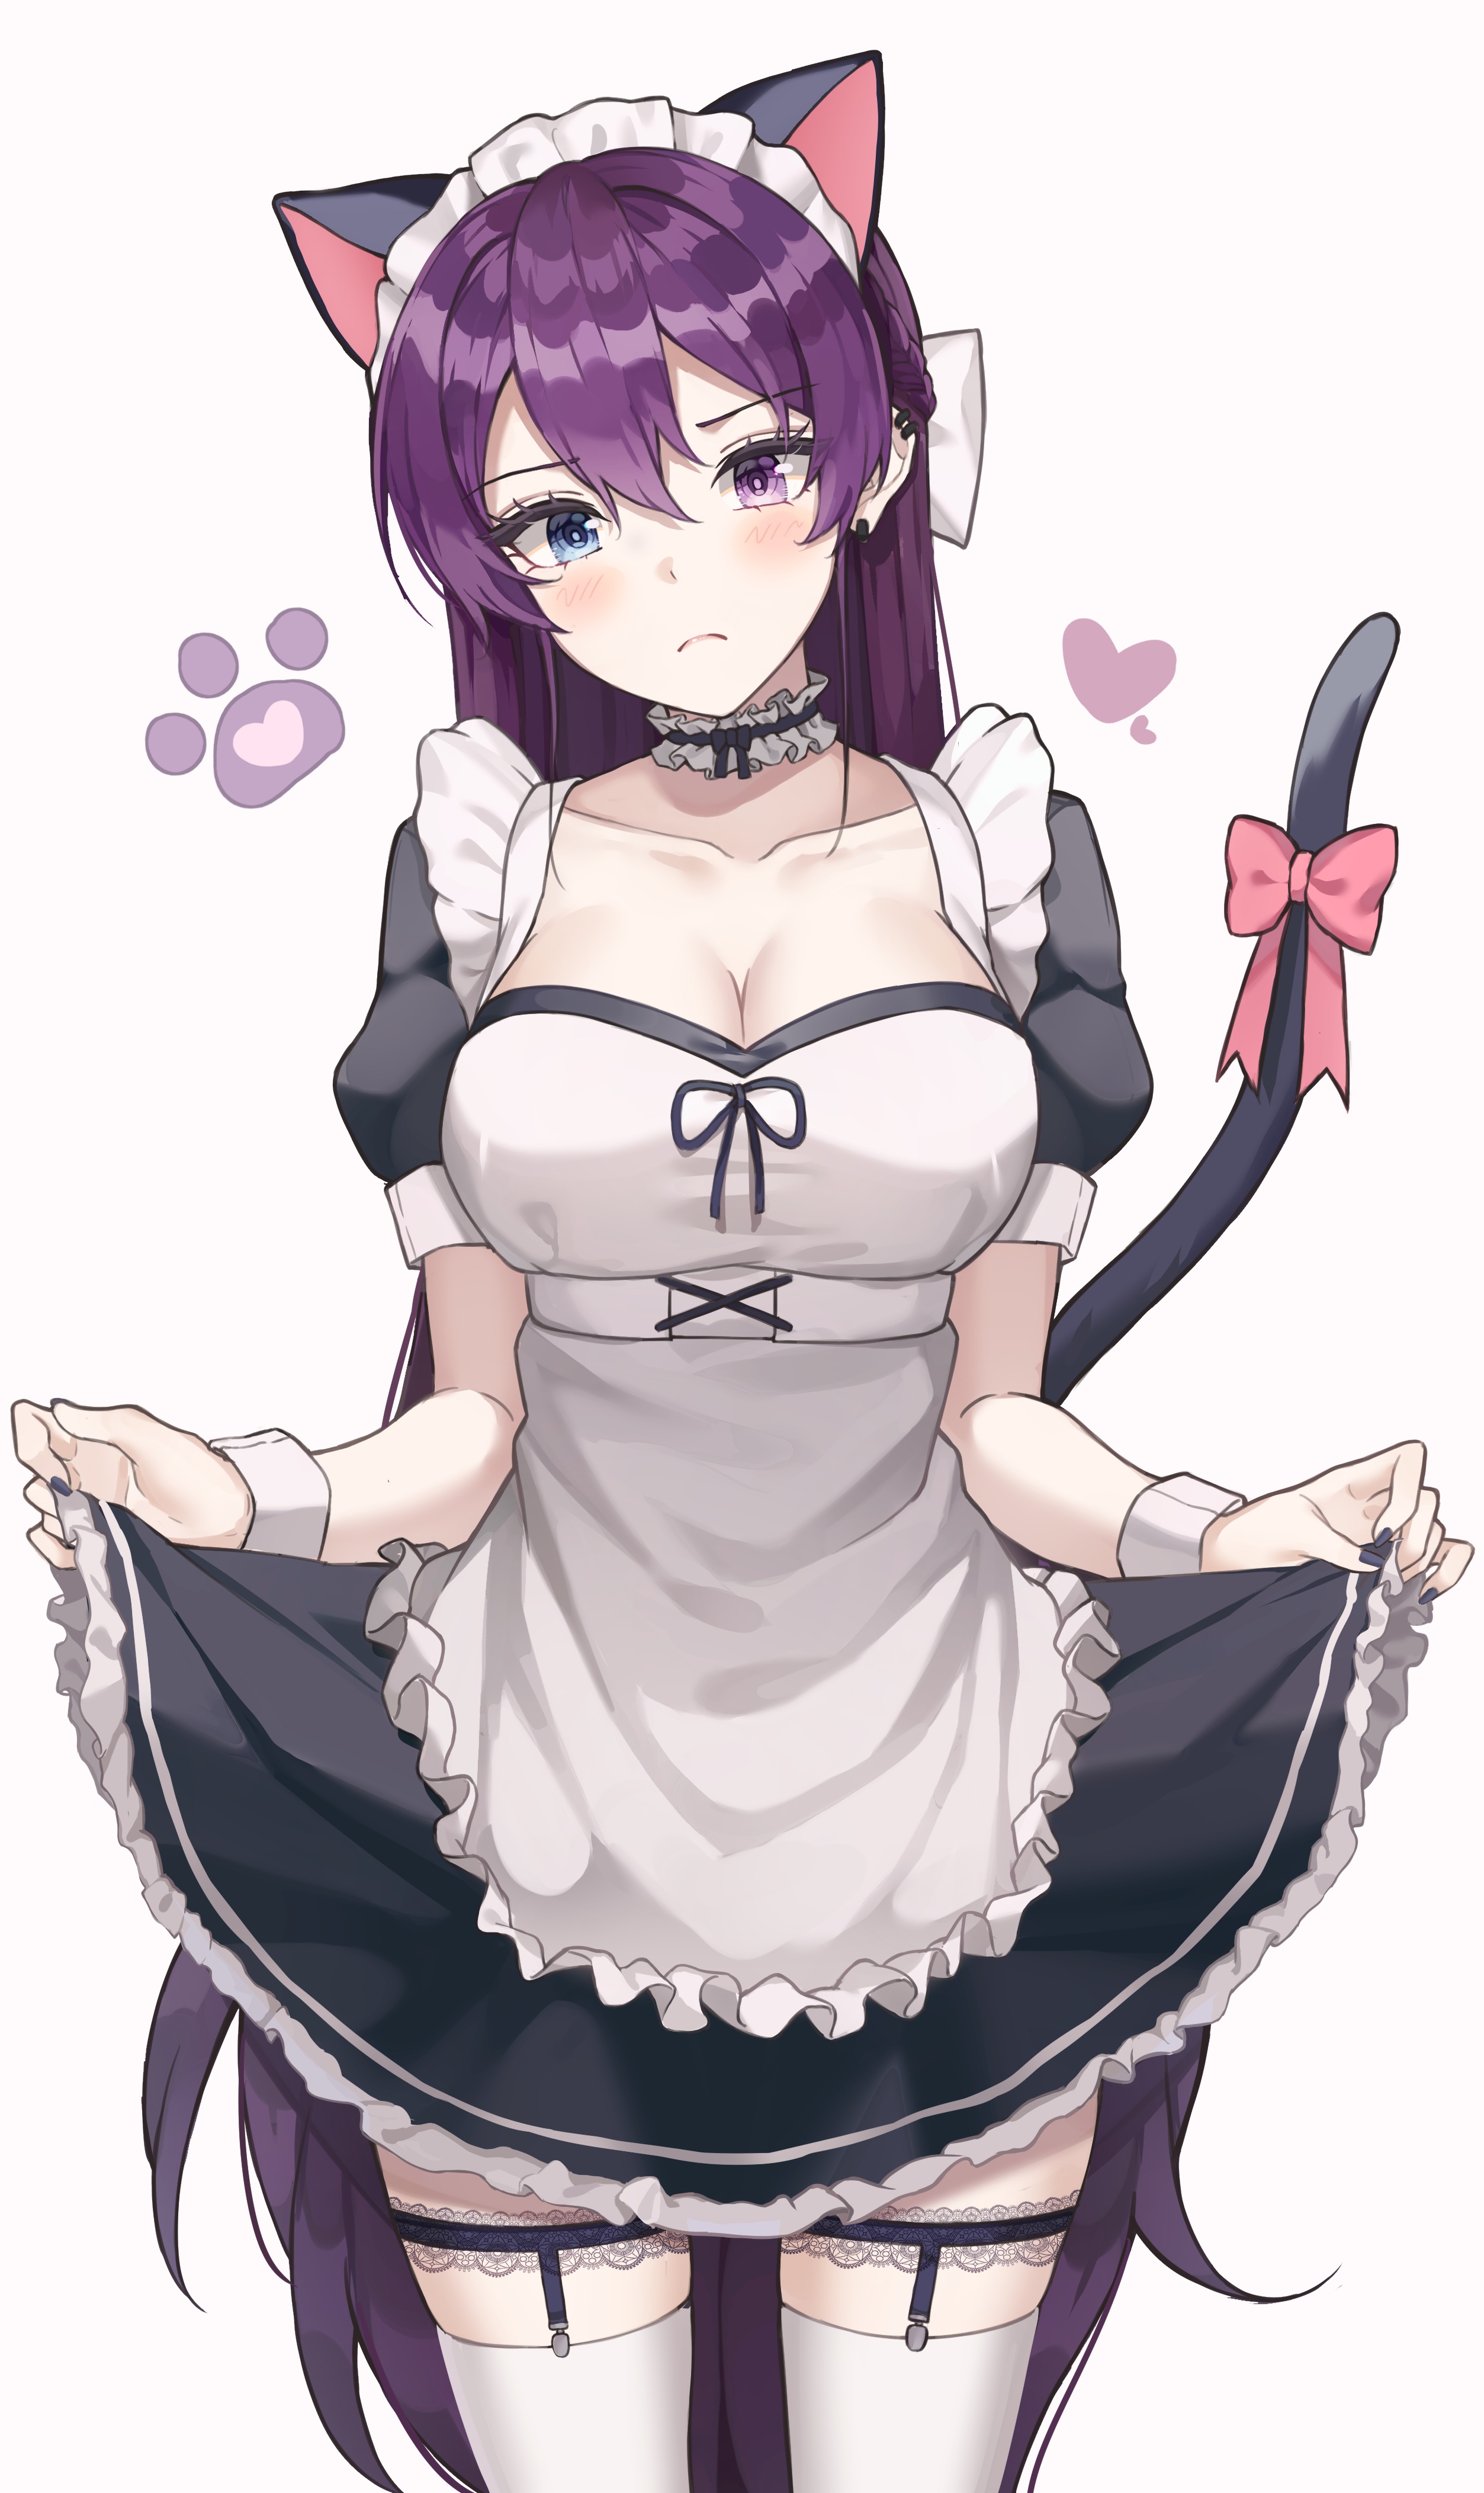 Anime 2506x4209 luxiel maid anime girls heterochromia cleavage stockings thigh-highs animal ears tail original characters cat girl purple hair long hair maid outfit lifting dress blushing standing